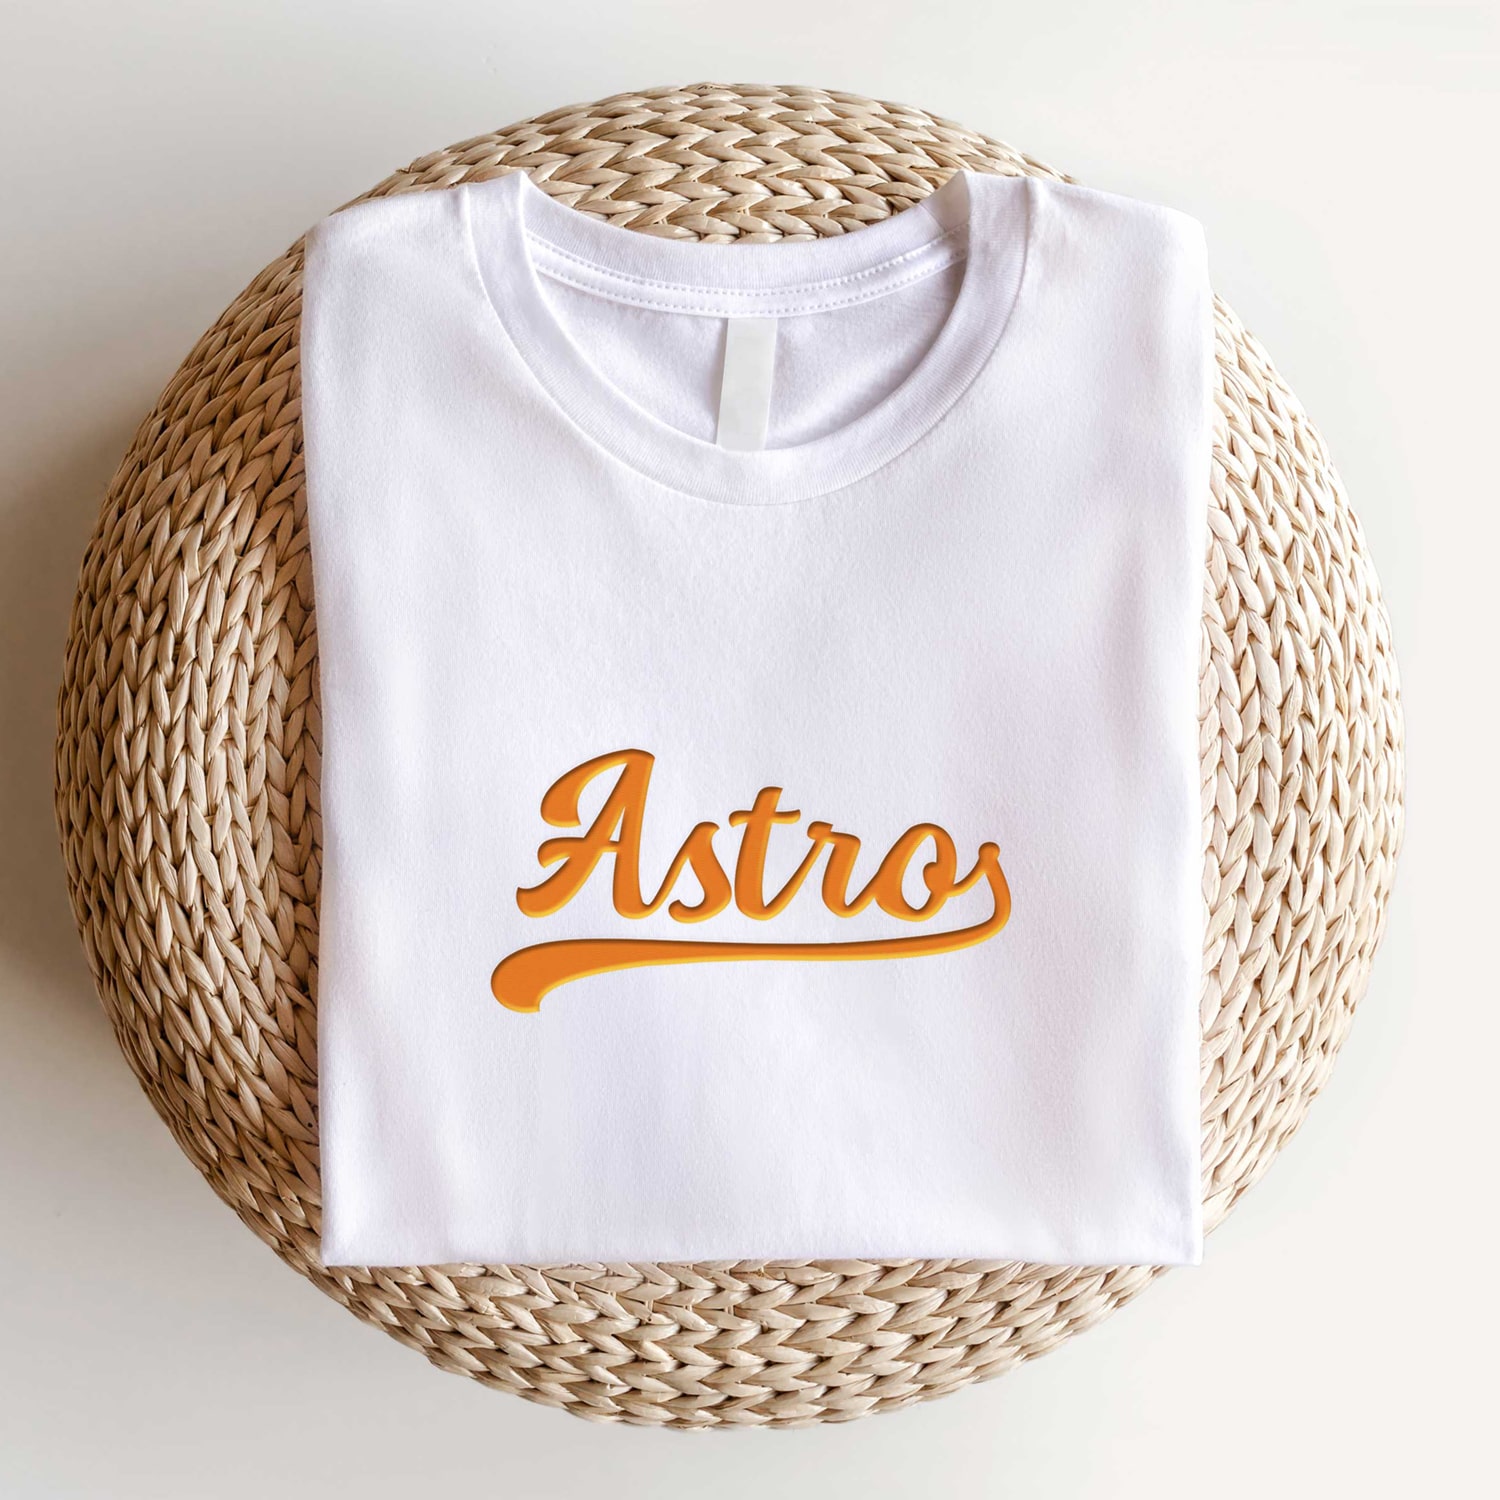 Astros Embroidered Shirt, Gifts for Astros Fans, Astros Houston Astros -  Happy Place for Music Lovers